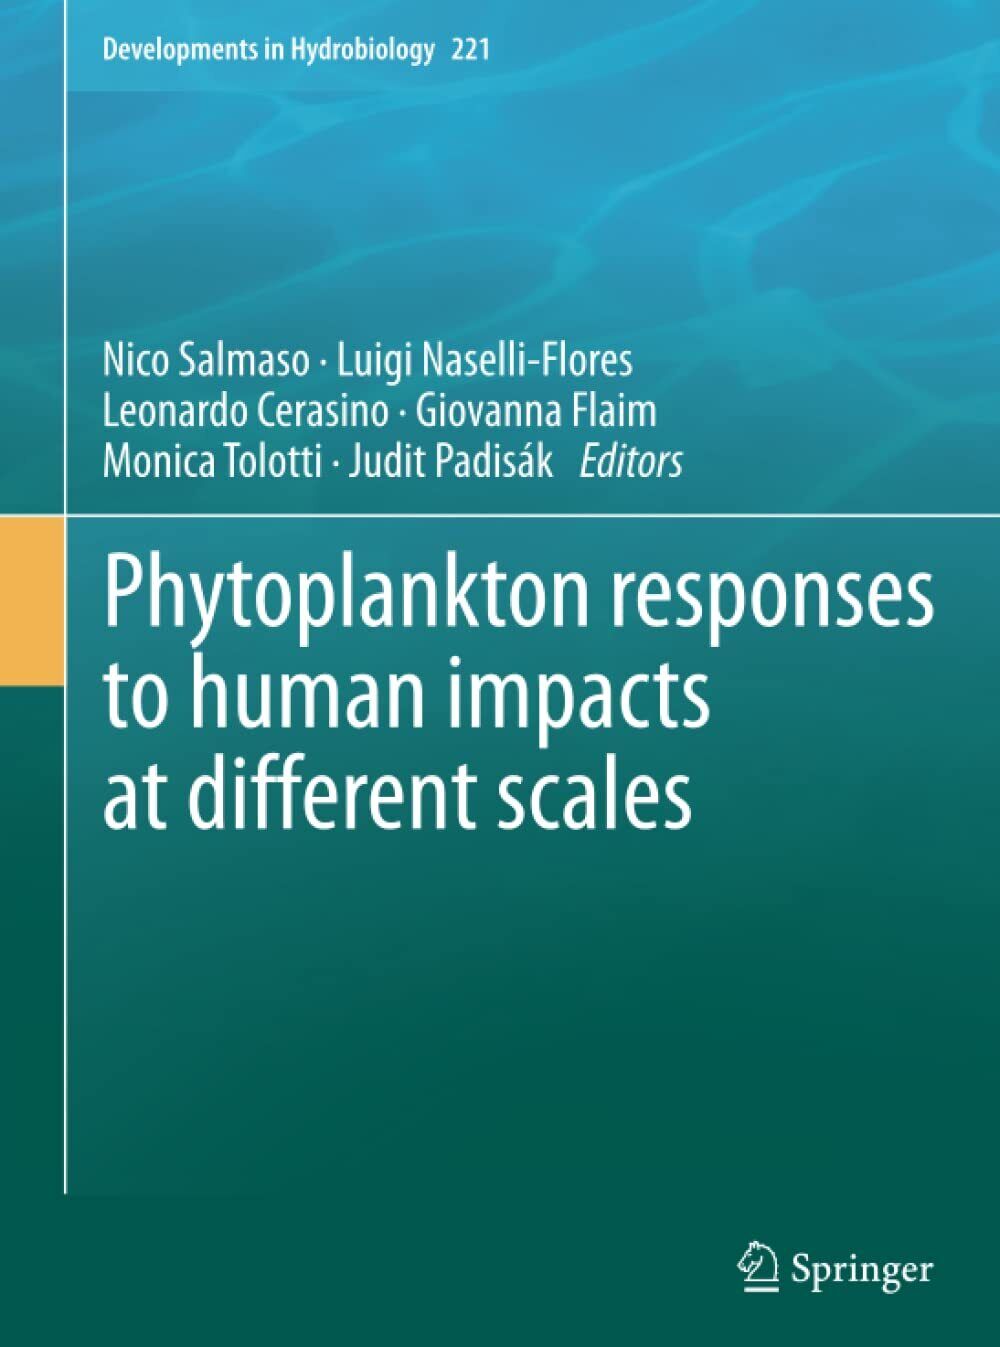 Phytoplankton responses to human impacts at different scales - Springer, 2014 libro usato